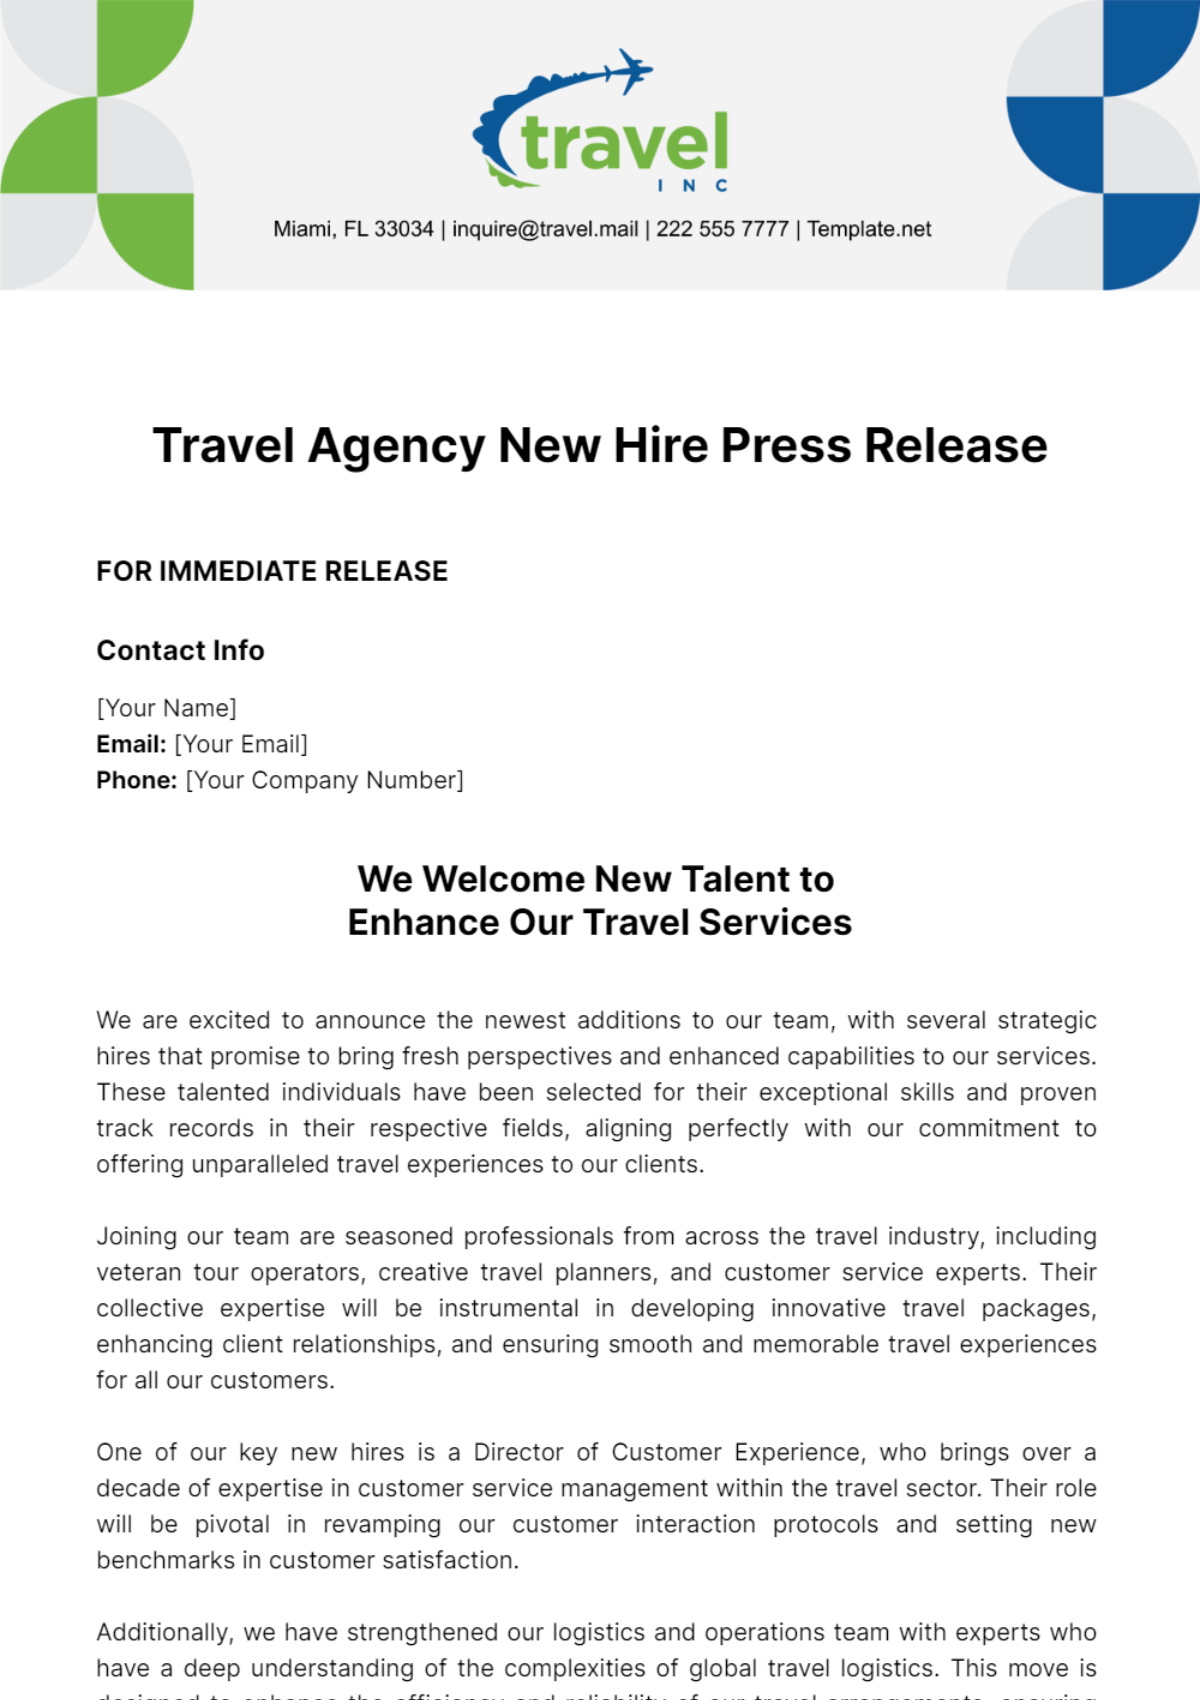 Free Travel Agency New Hire Press Release Template